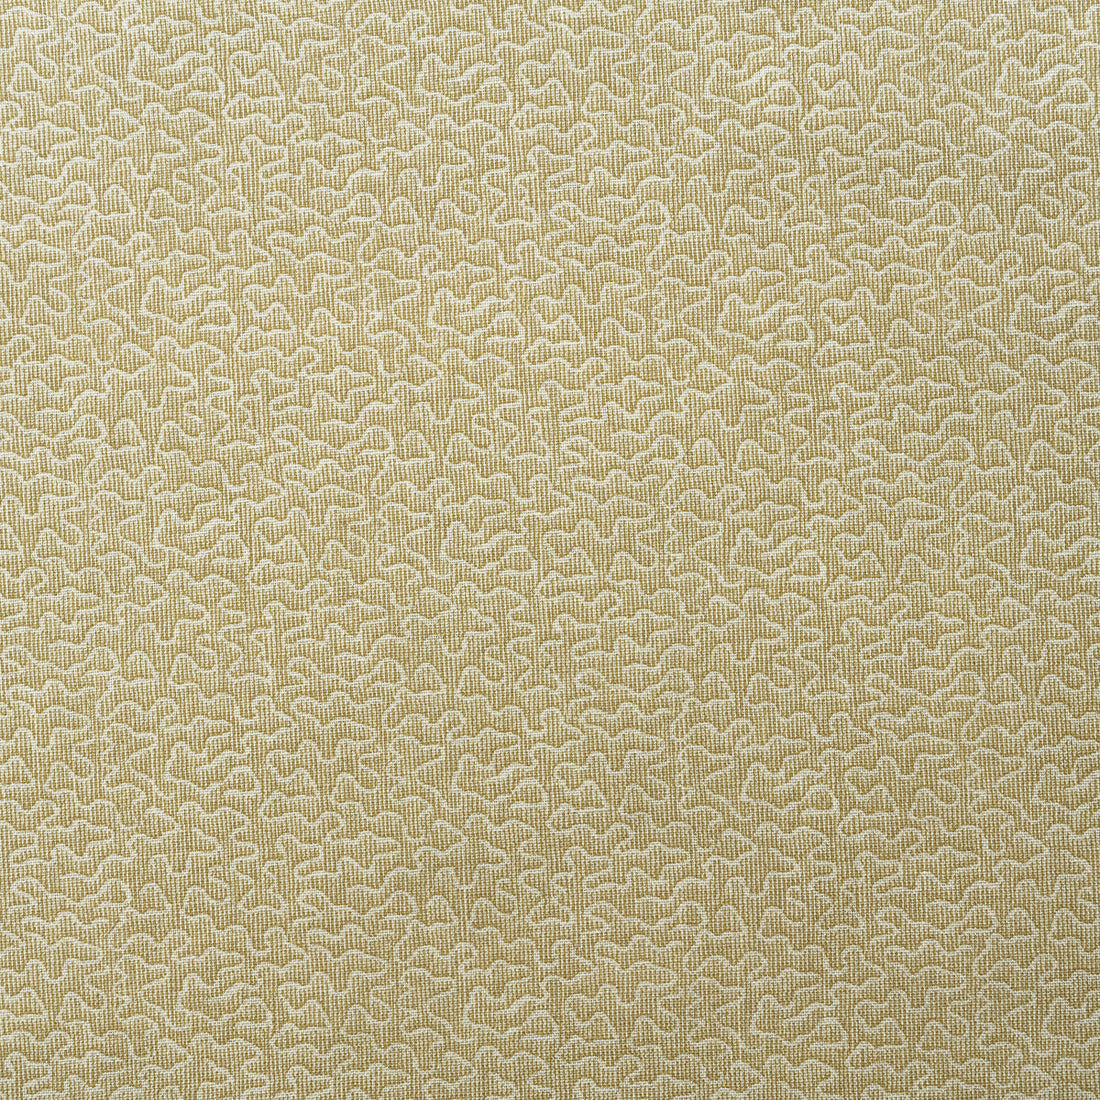 Pollen fabric in honey color - pattern AM100383.416.0 - by Kravet Couture in the Andrew Martin Garden Path collection